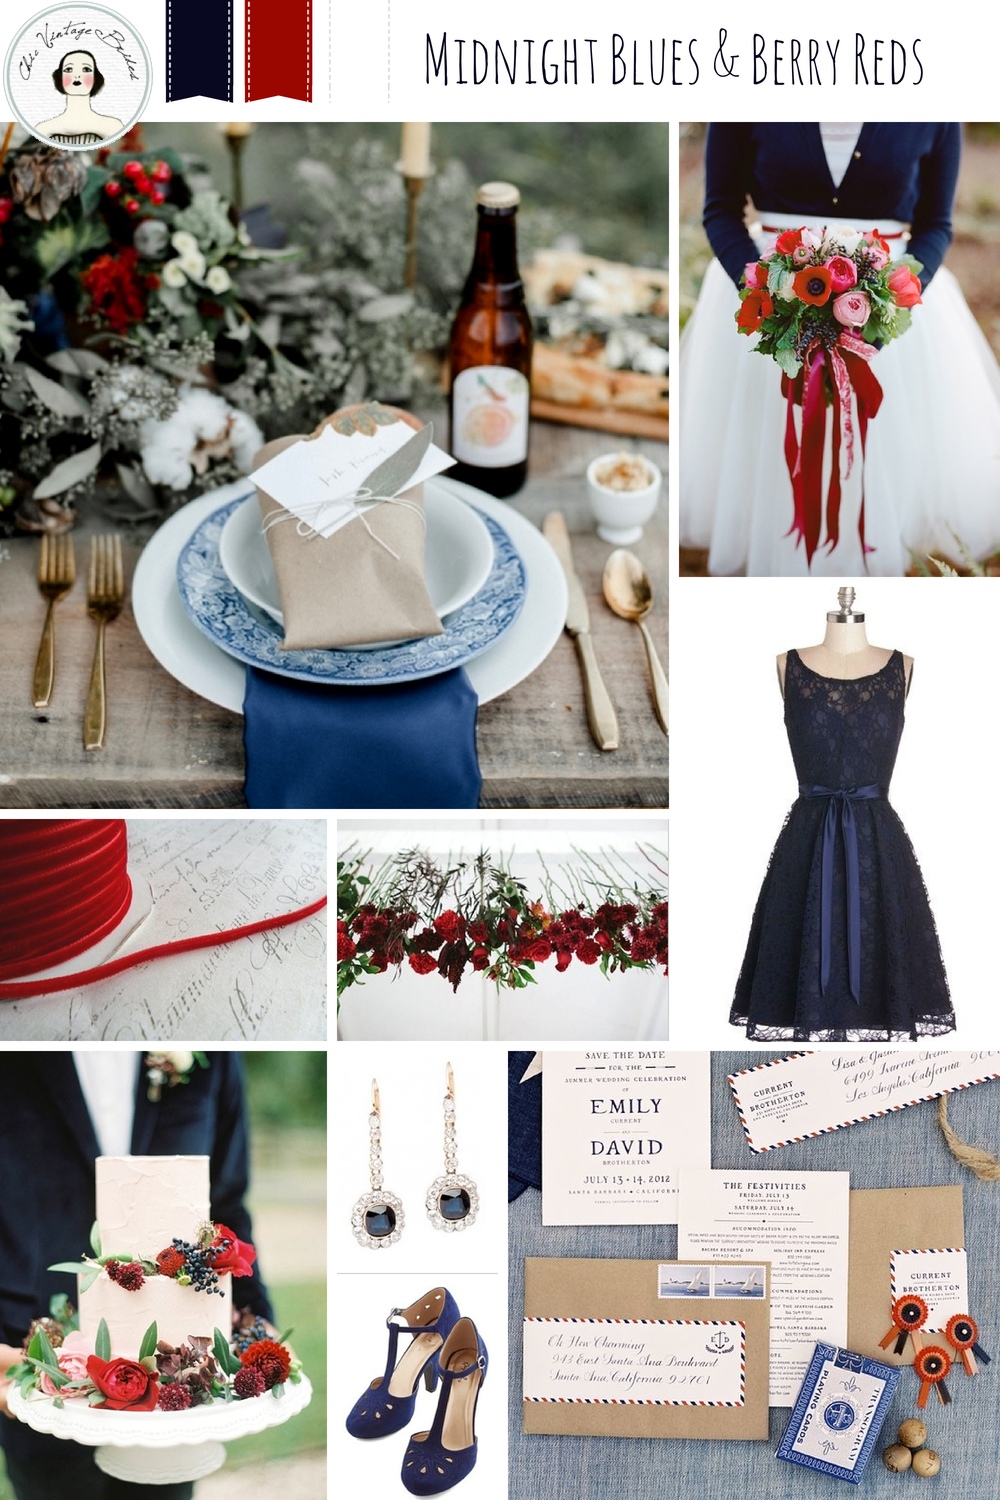 Red, White and Blue Wedding Inspiration Board